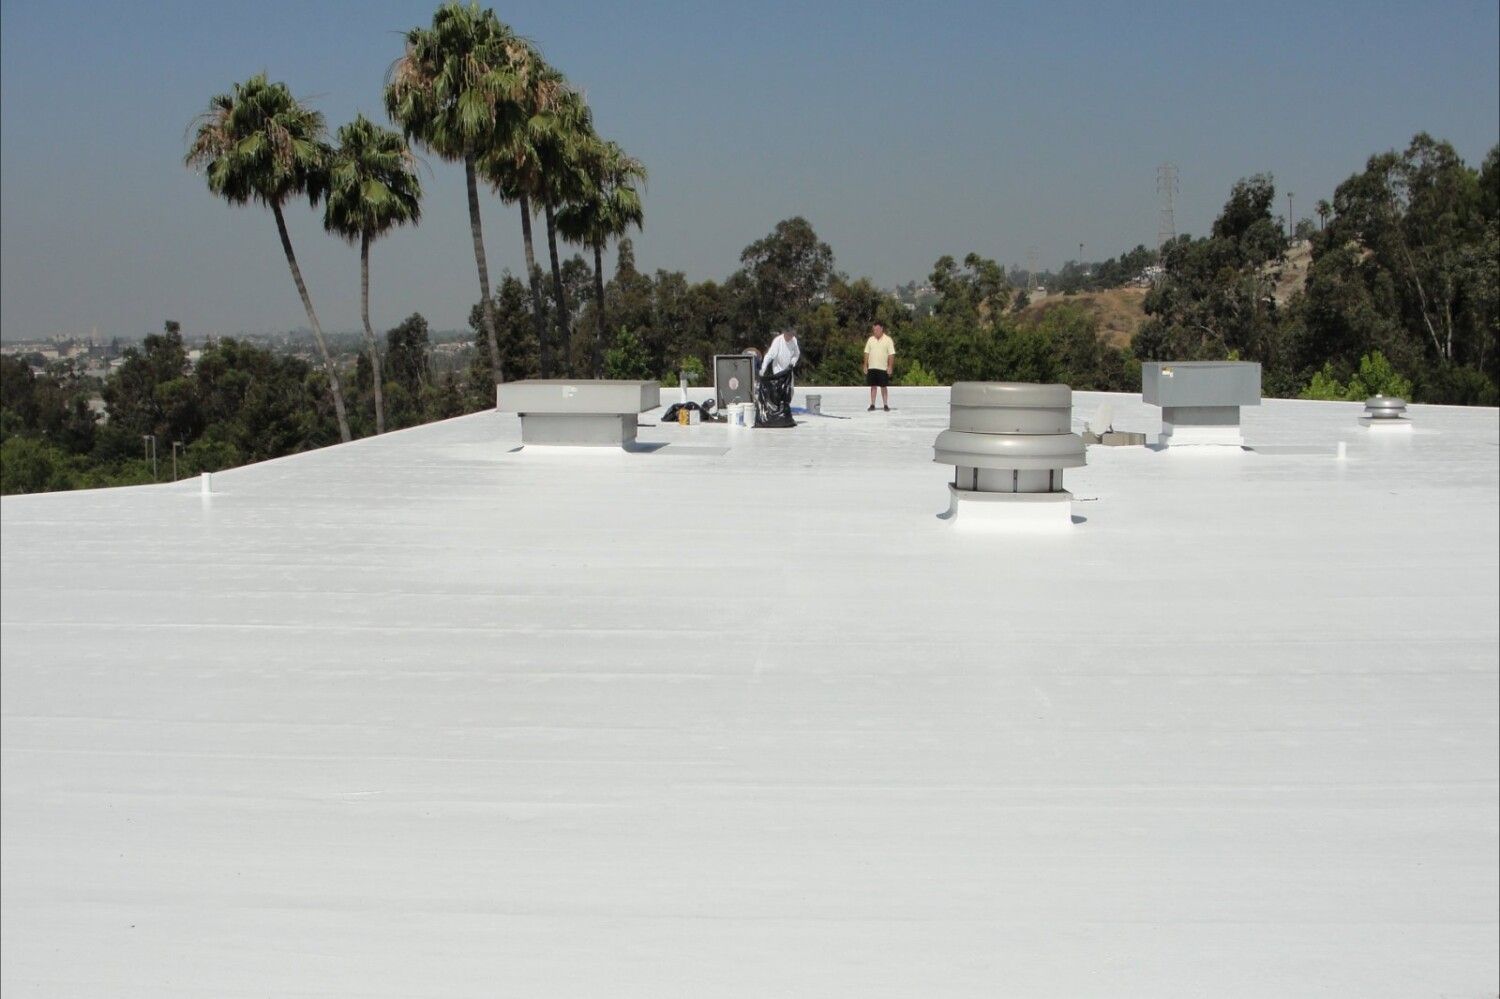 A white roof with palm trees in the background